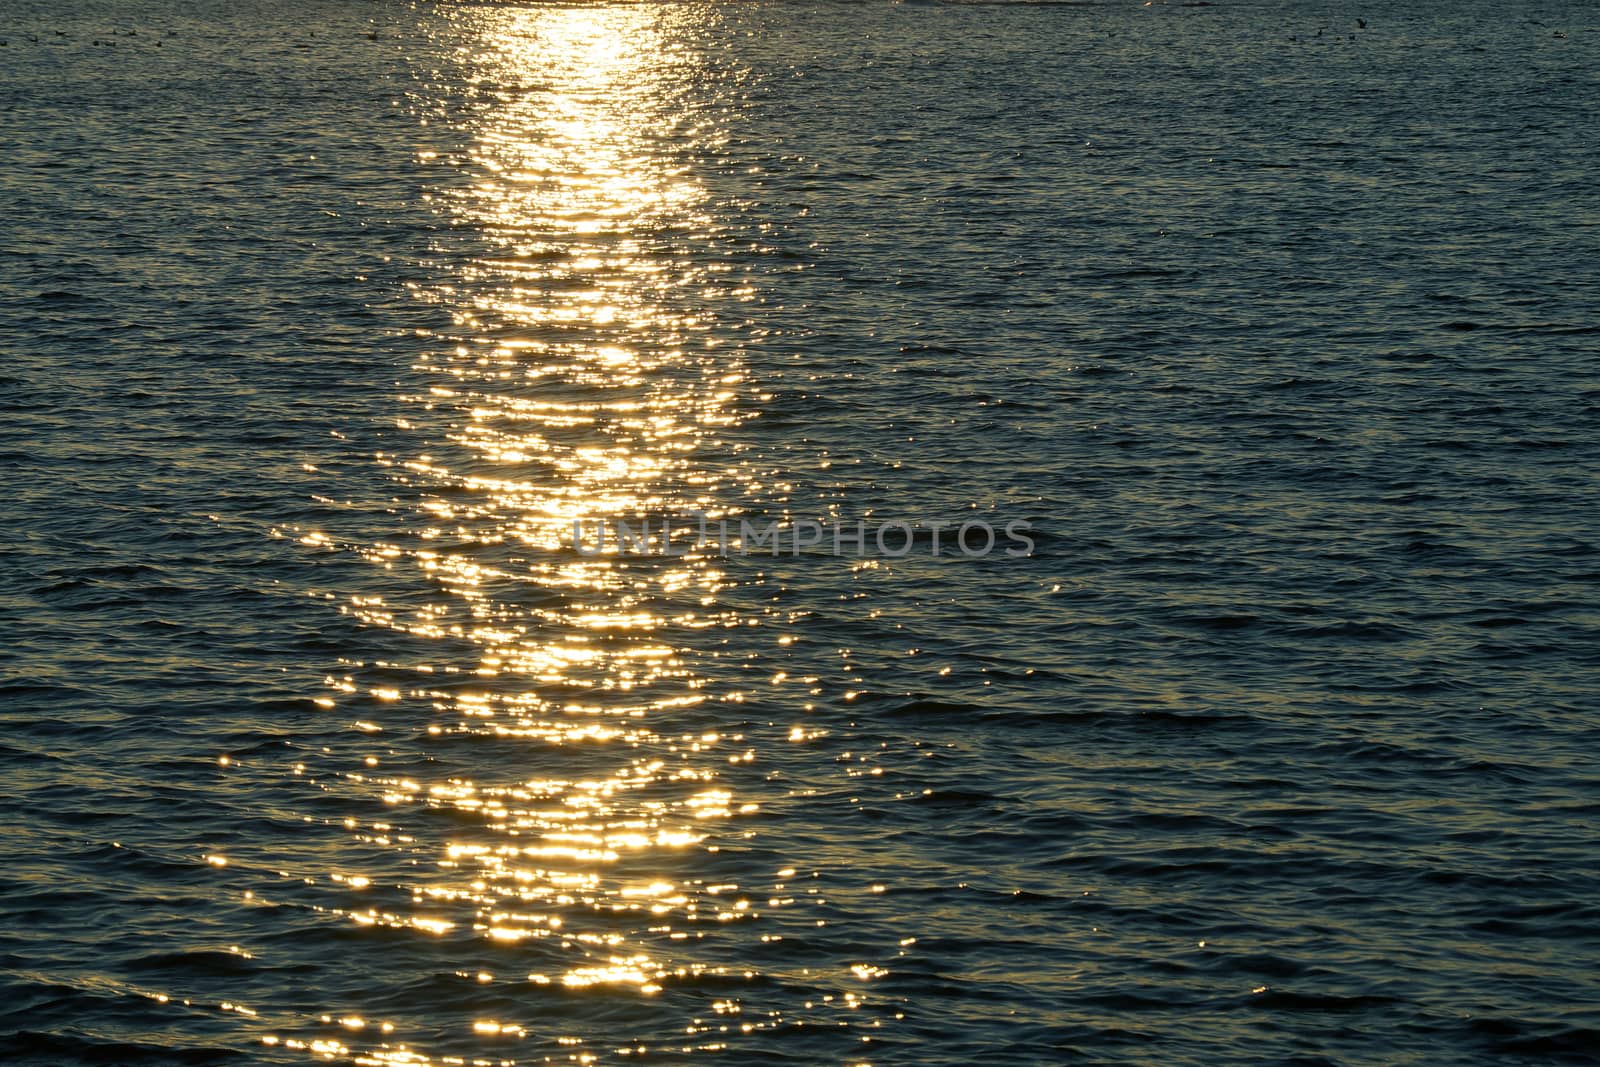 the setting sun is reflected in the water.